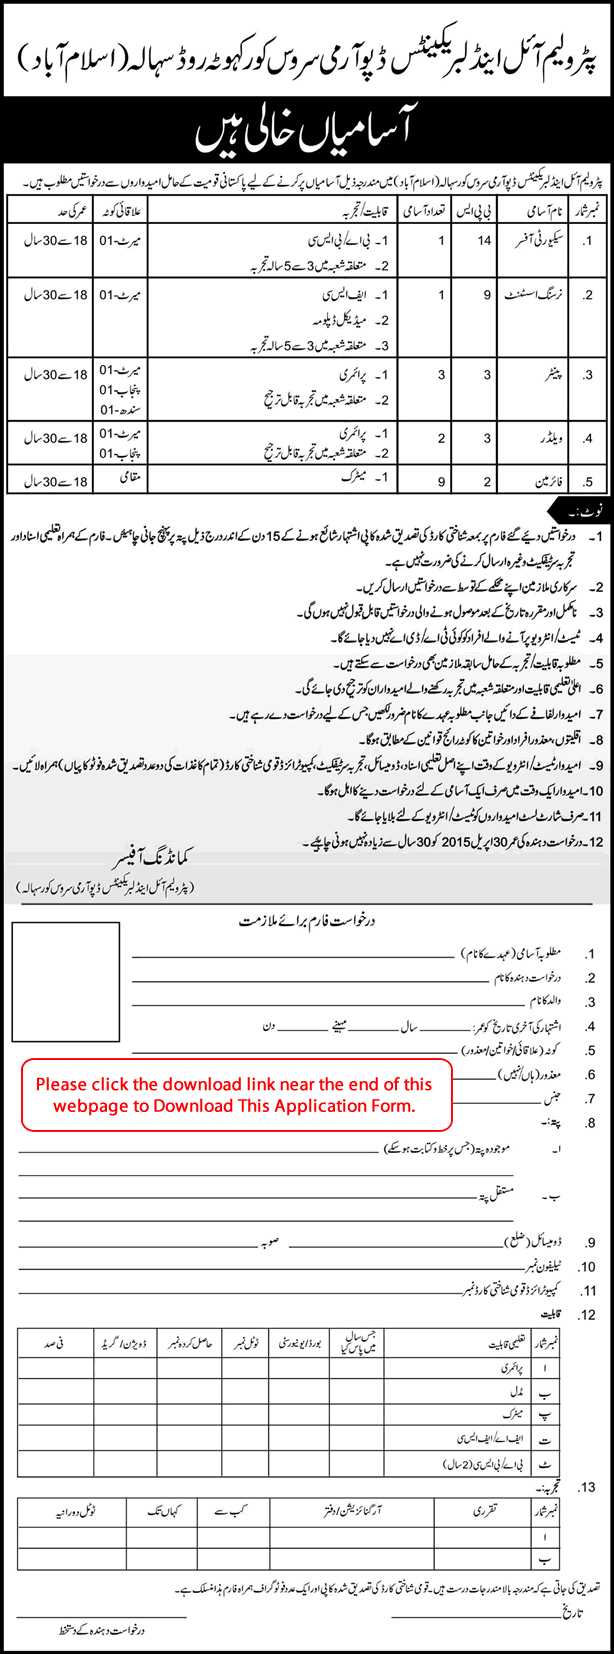 Petroleum Oil and Lubricants Depot Army Service Corps Sihala Jobs 2015 February Islamabad Application Form